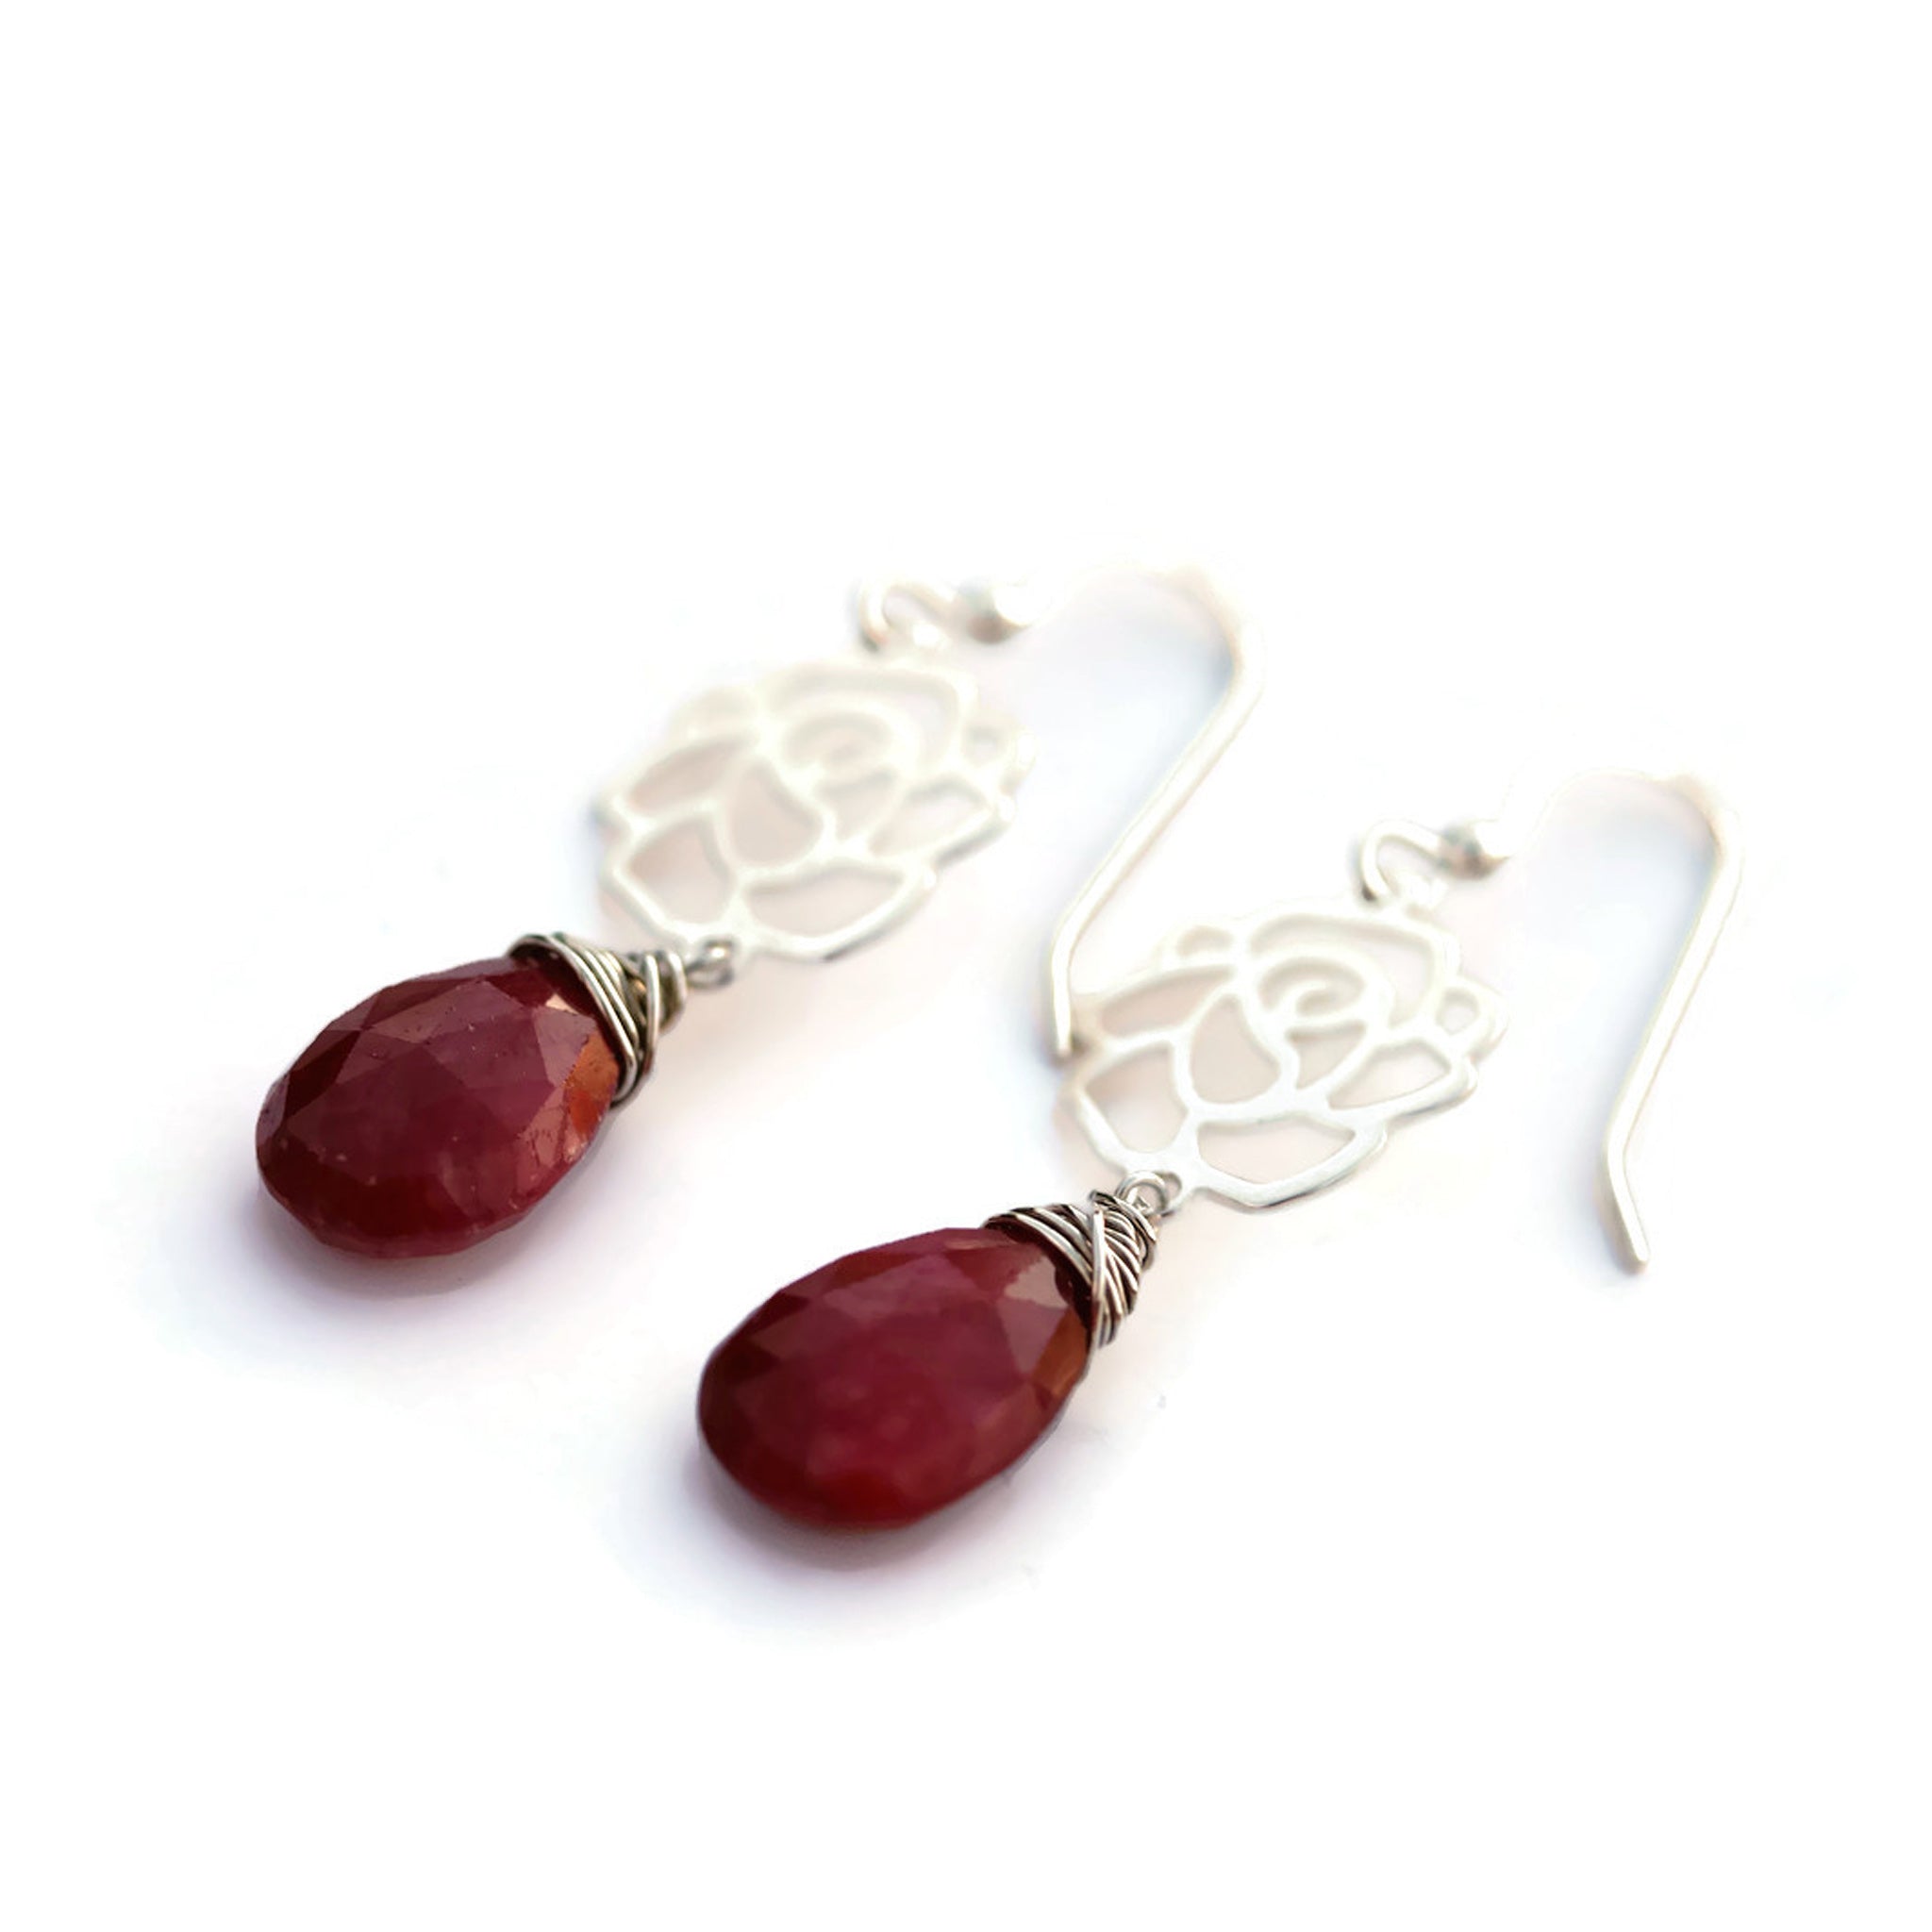 Ruby Earrings with Sterling Silver Roses - Sienna Grace Jewelry | Pretty Little Handcrafted Sparkles